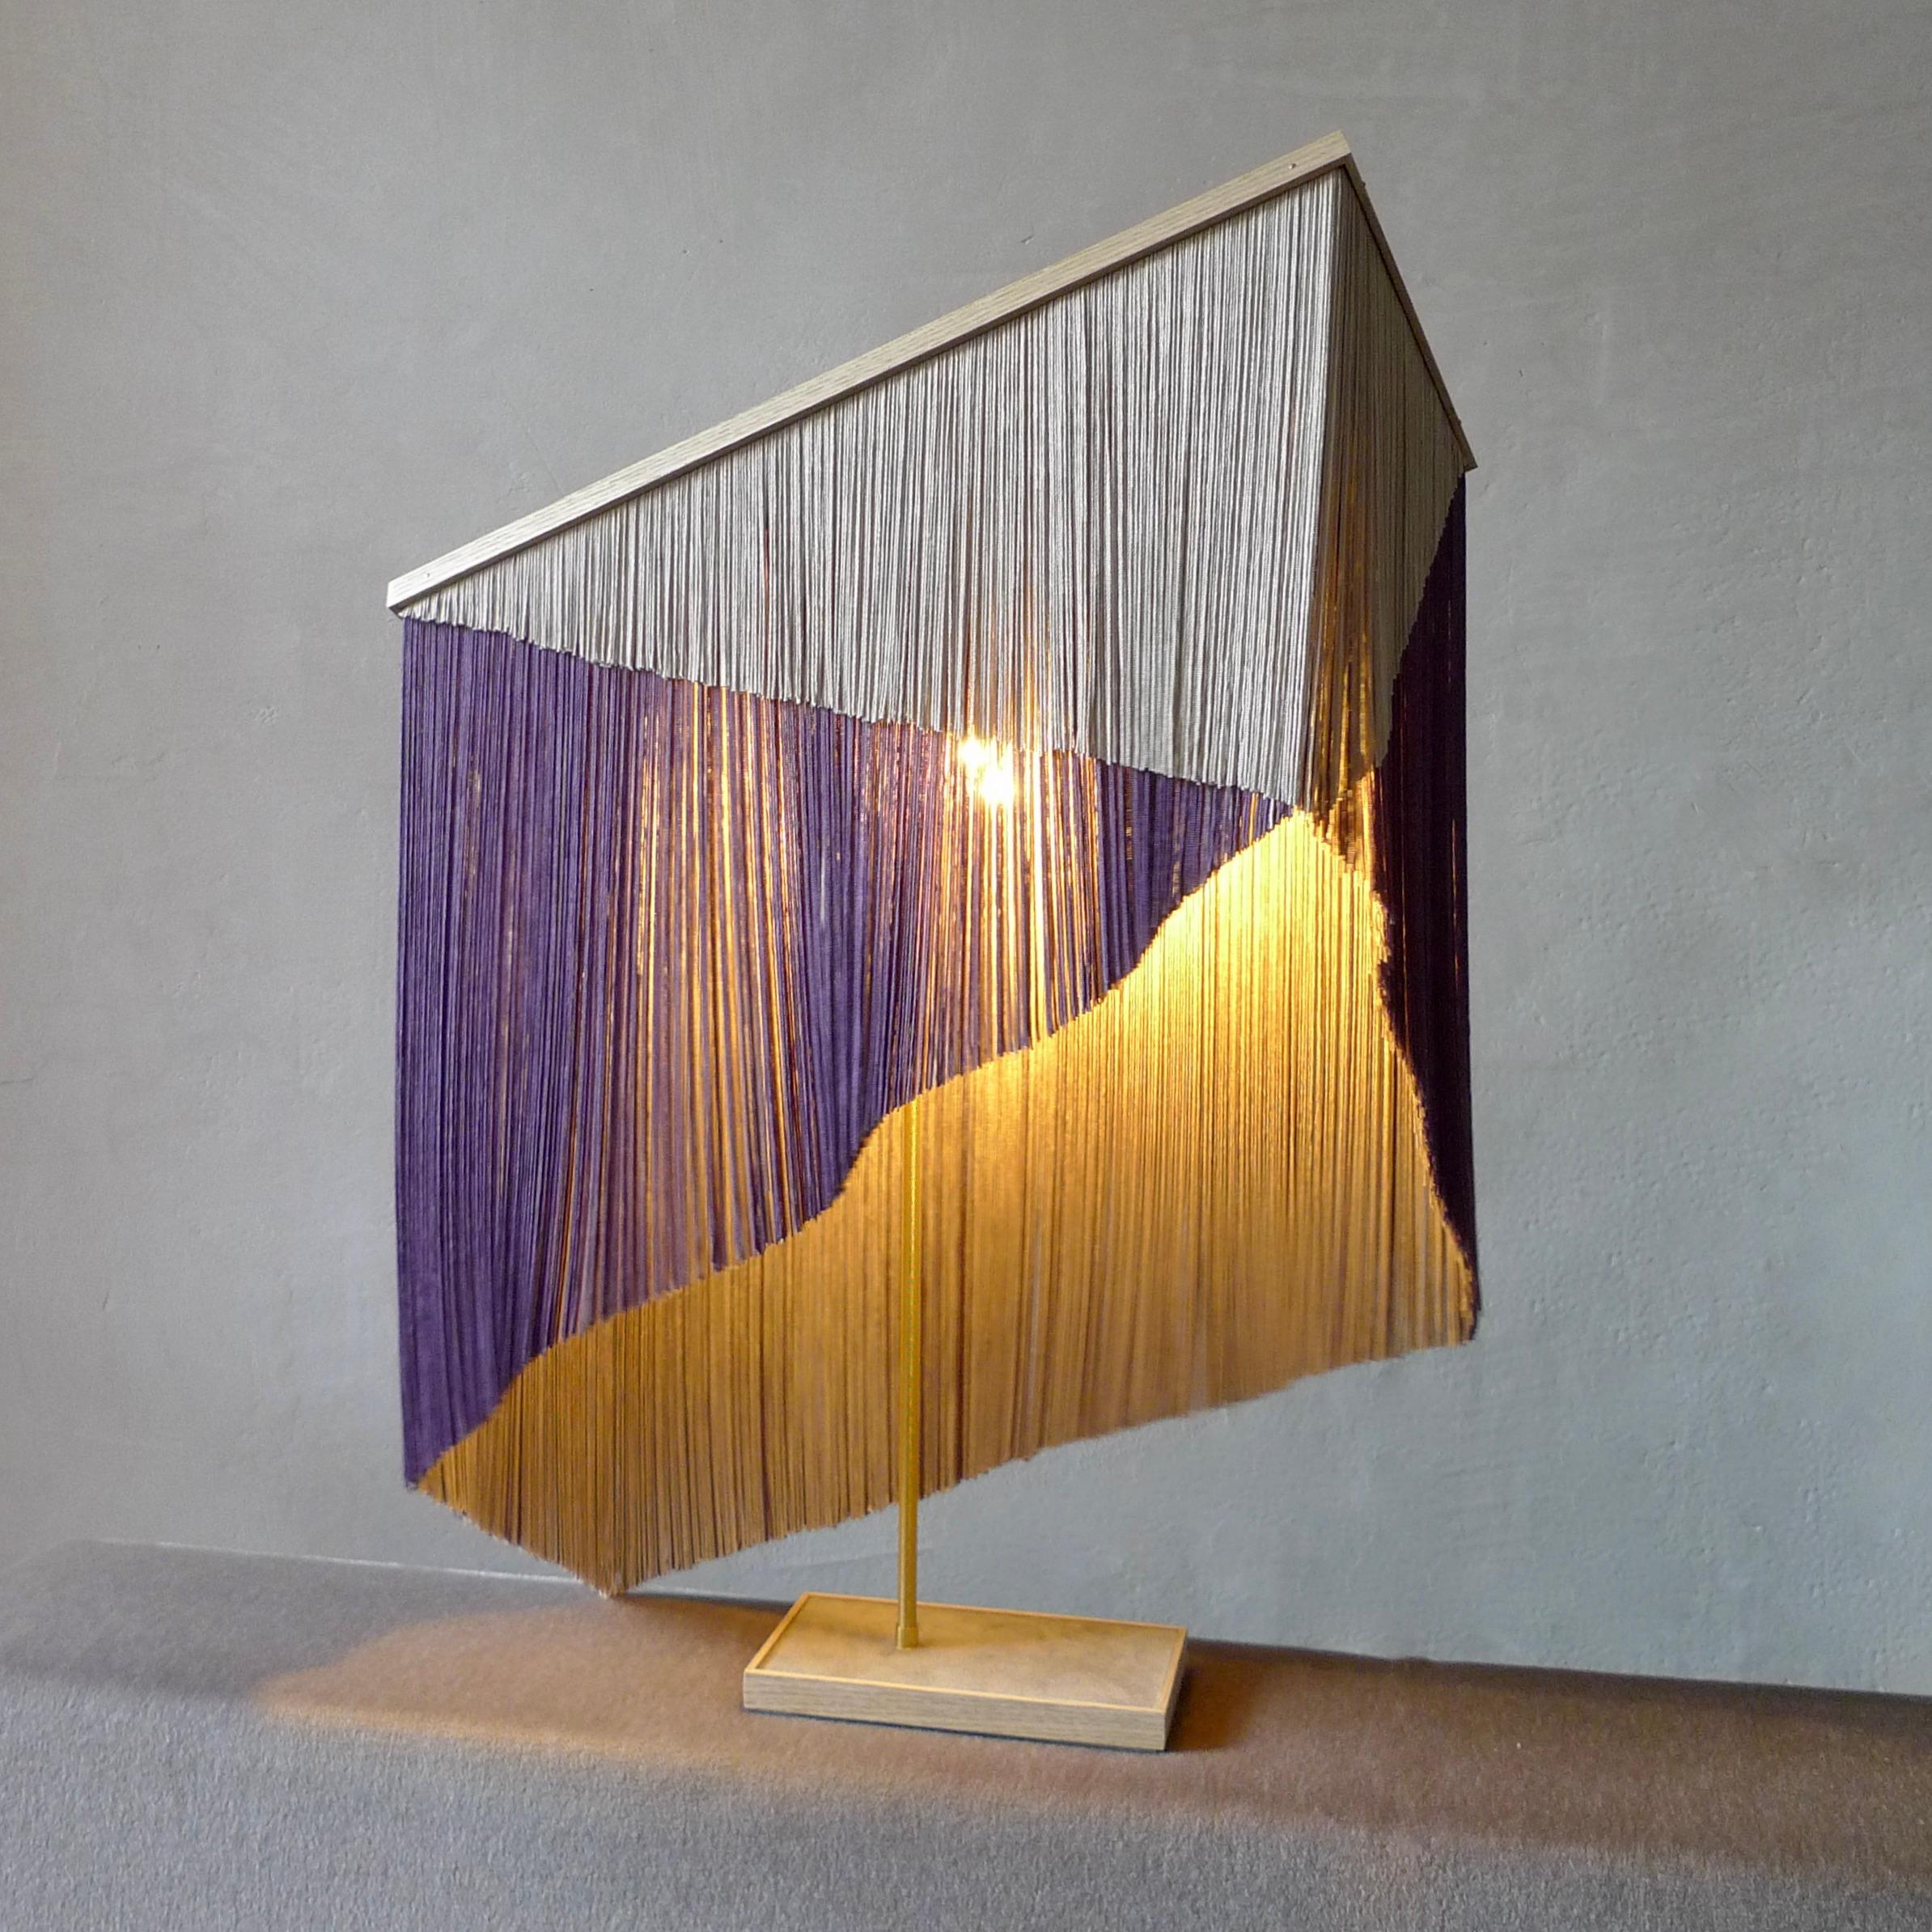 No. 30 table lamp by Sander Bottinga
Object size 4
Dimensions: H 73 x W 38 x D 25 cm
Materials: Brass, Wood, Leather, Viscose Fringes
Variations available.

Handmade in brass, wood, leather and 3 double layered viscose fringes in geometric cut